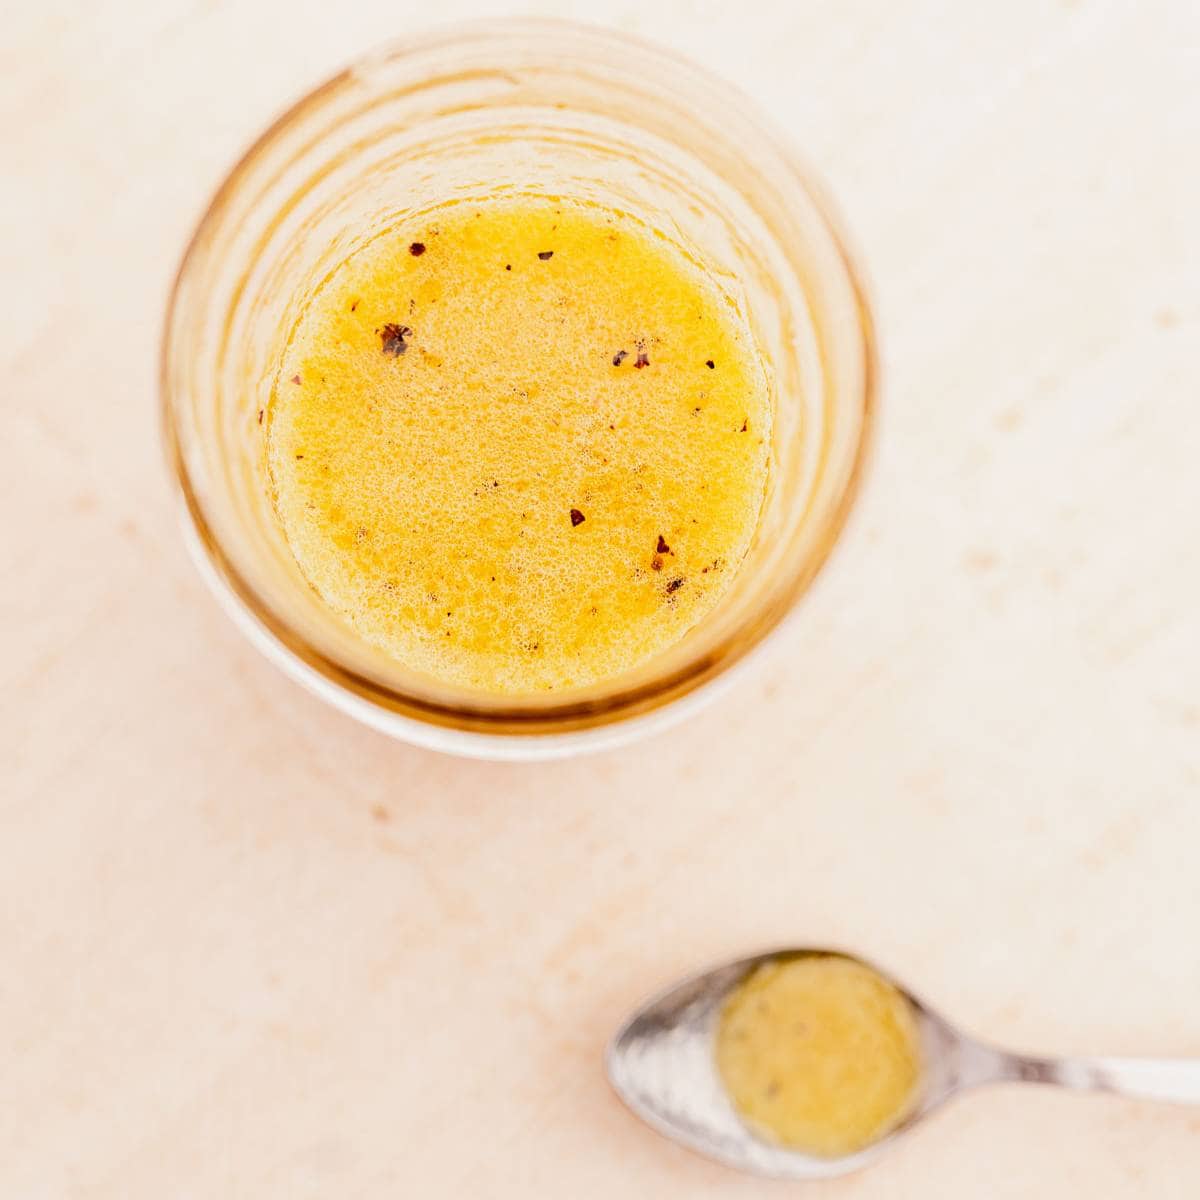 Top view of an open jar filled with a yellow salad dressing.